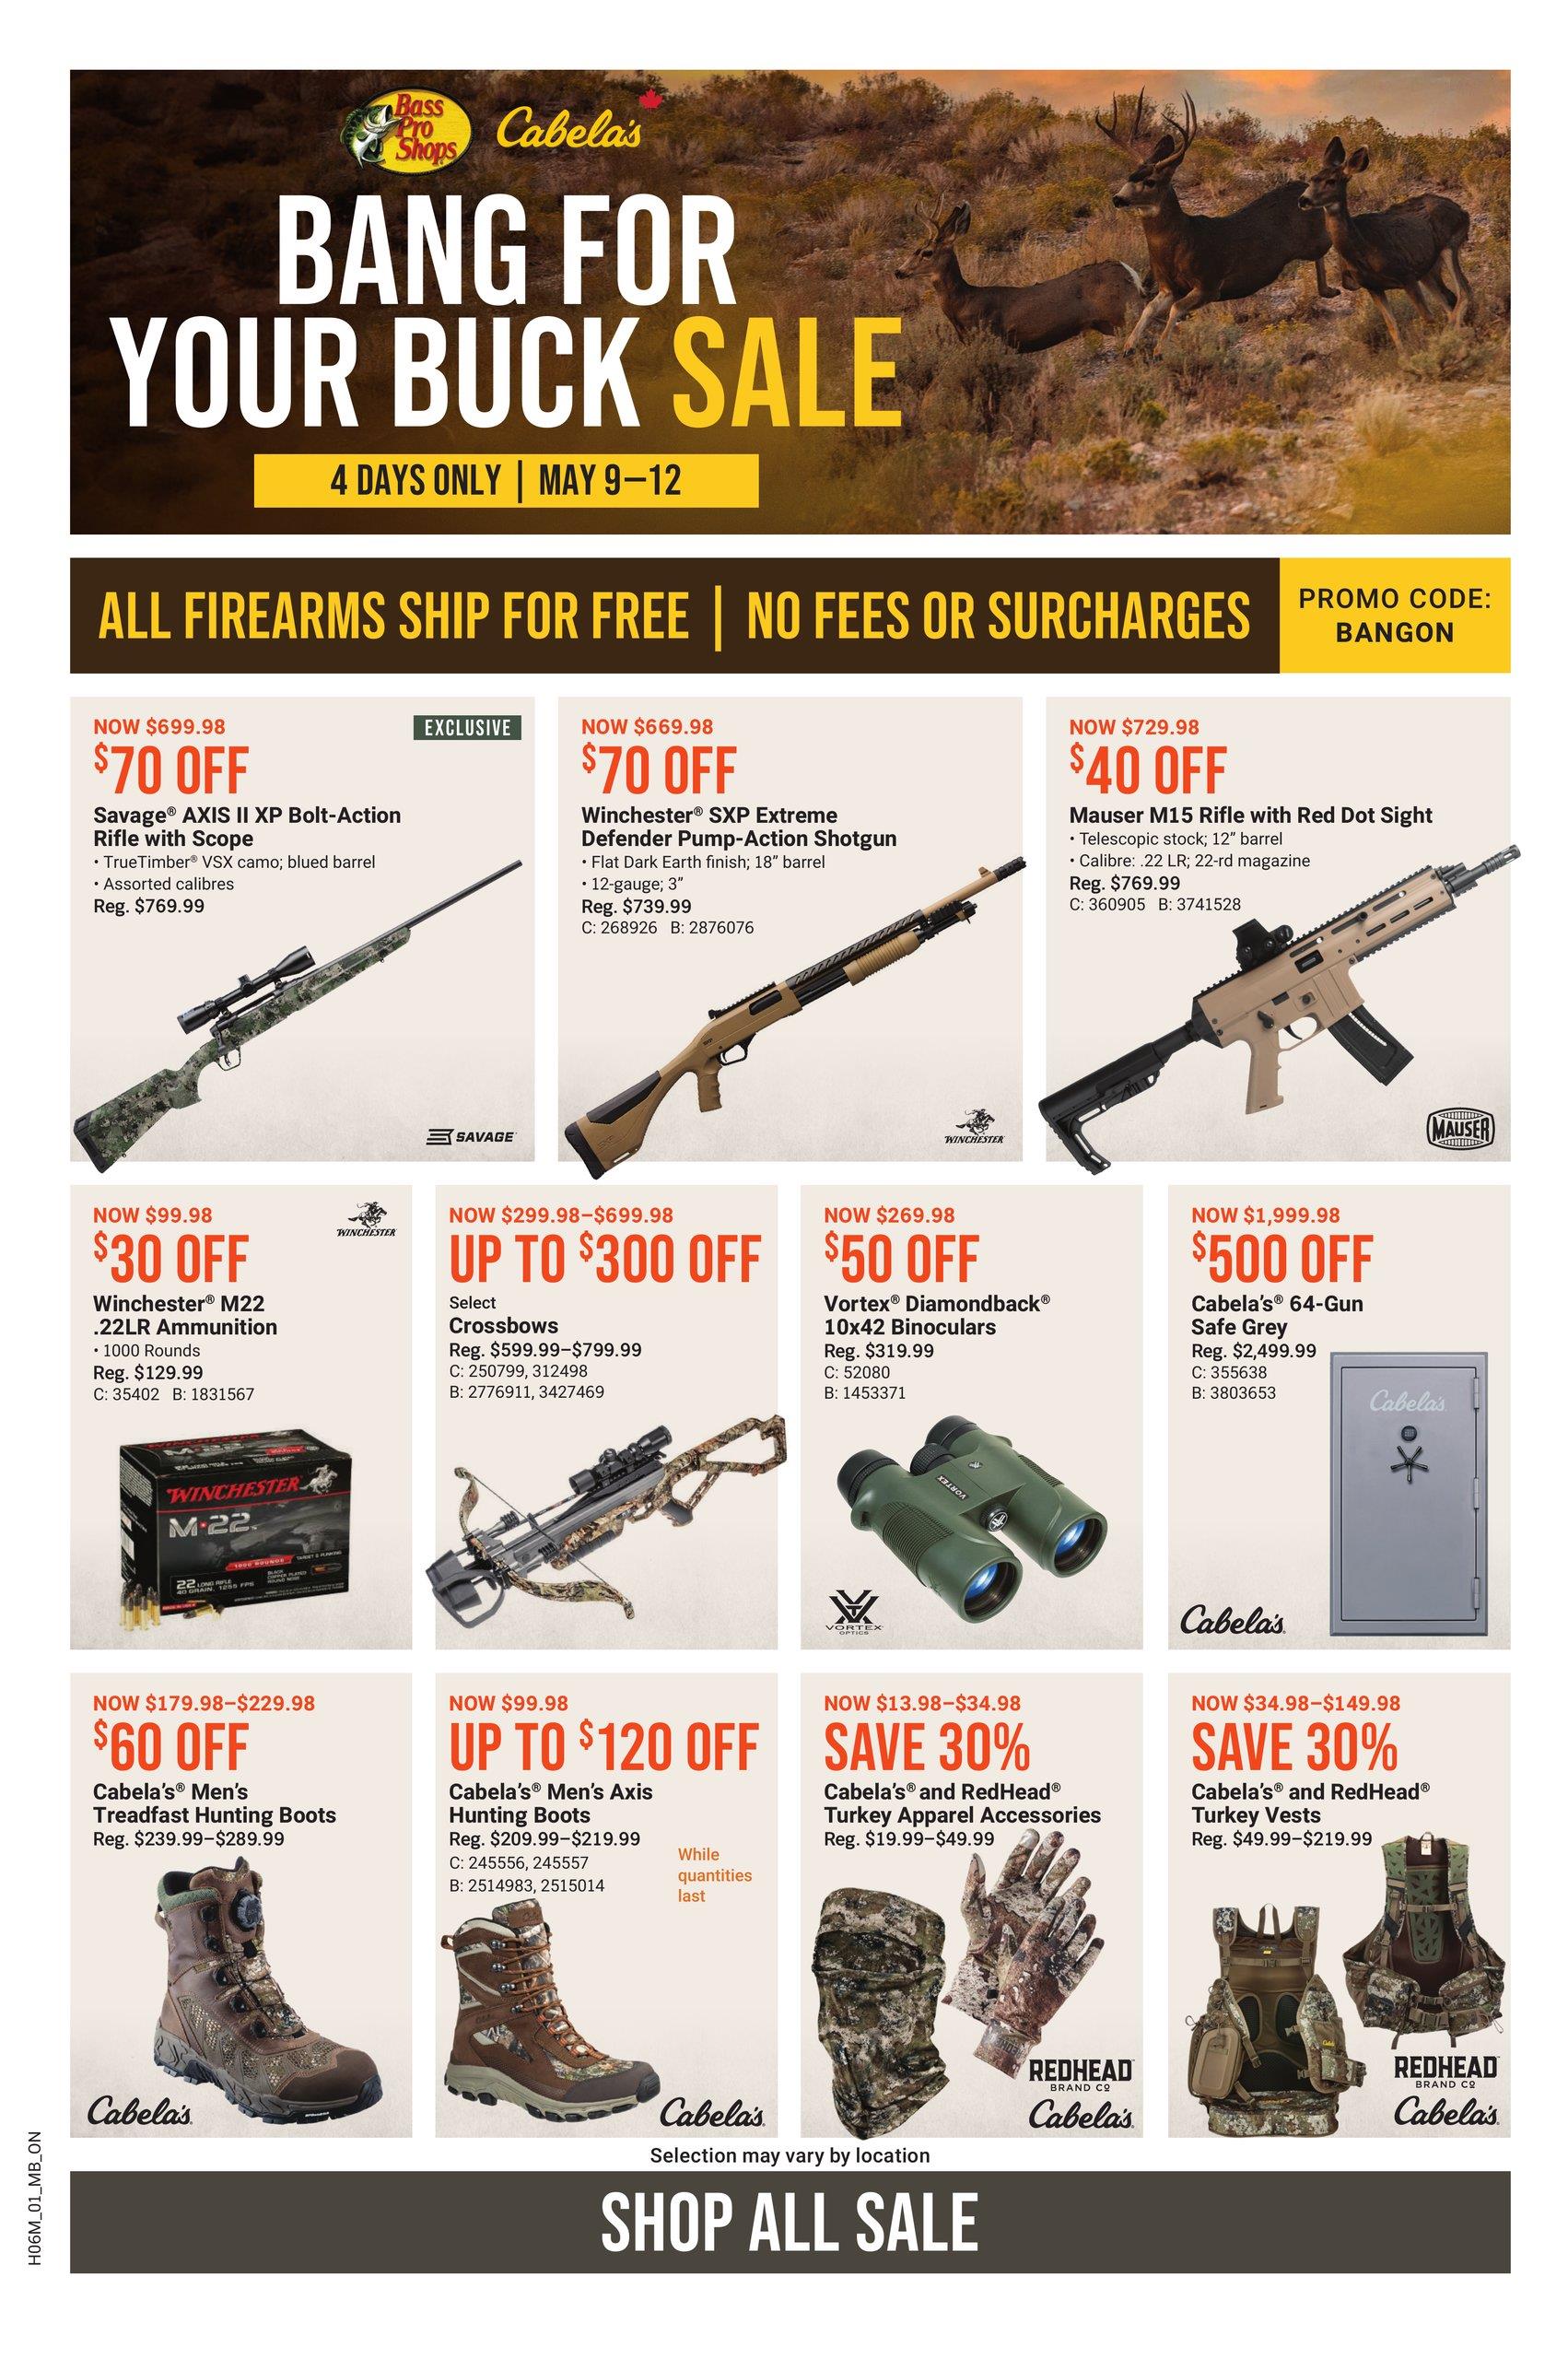 Cabela's - Bang for your Buck Sale